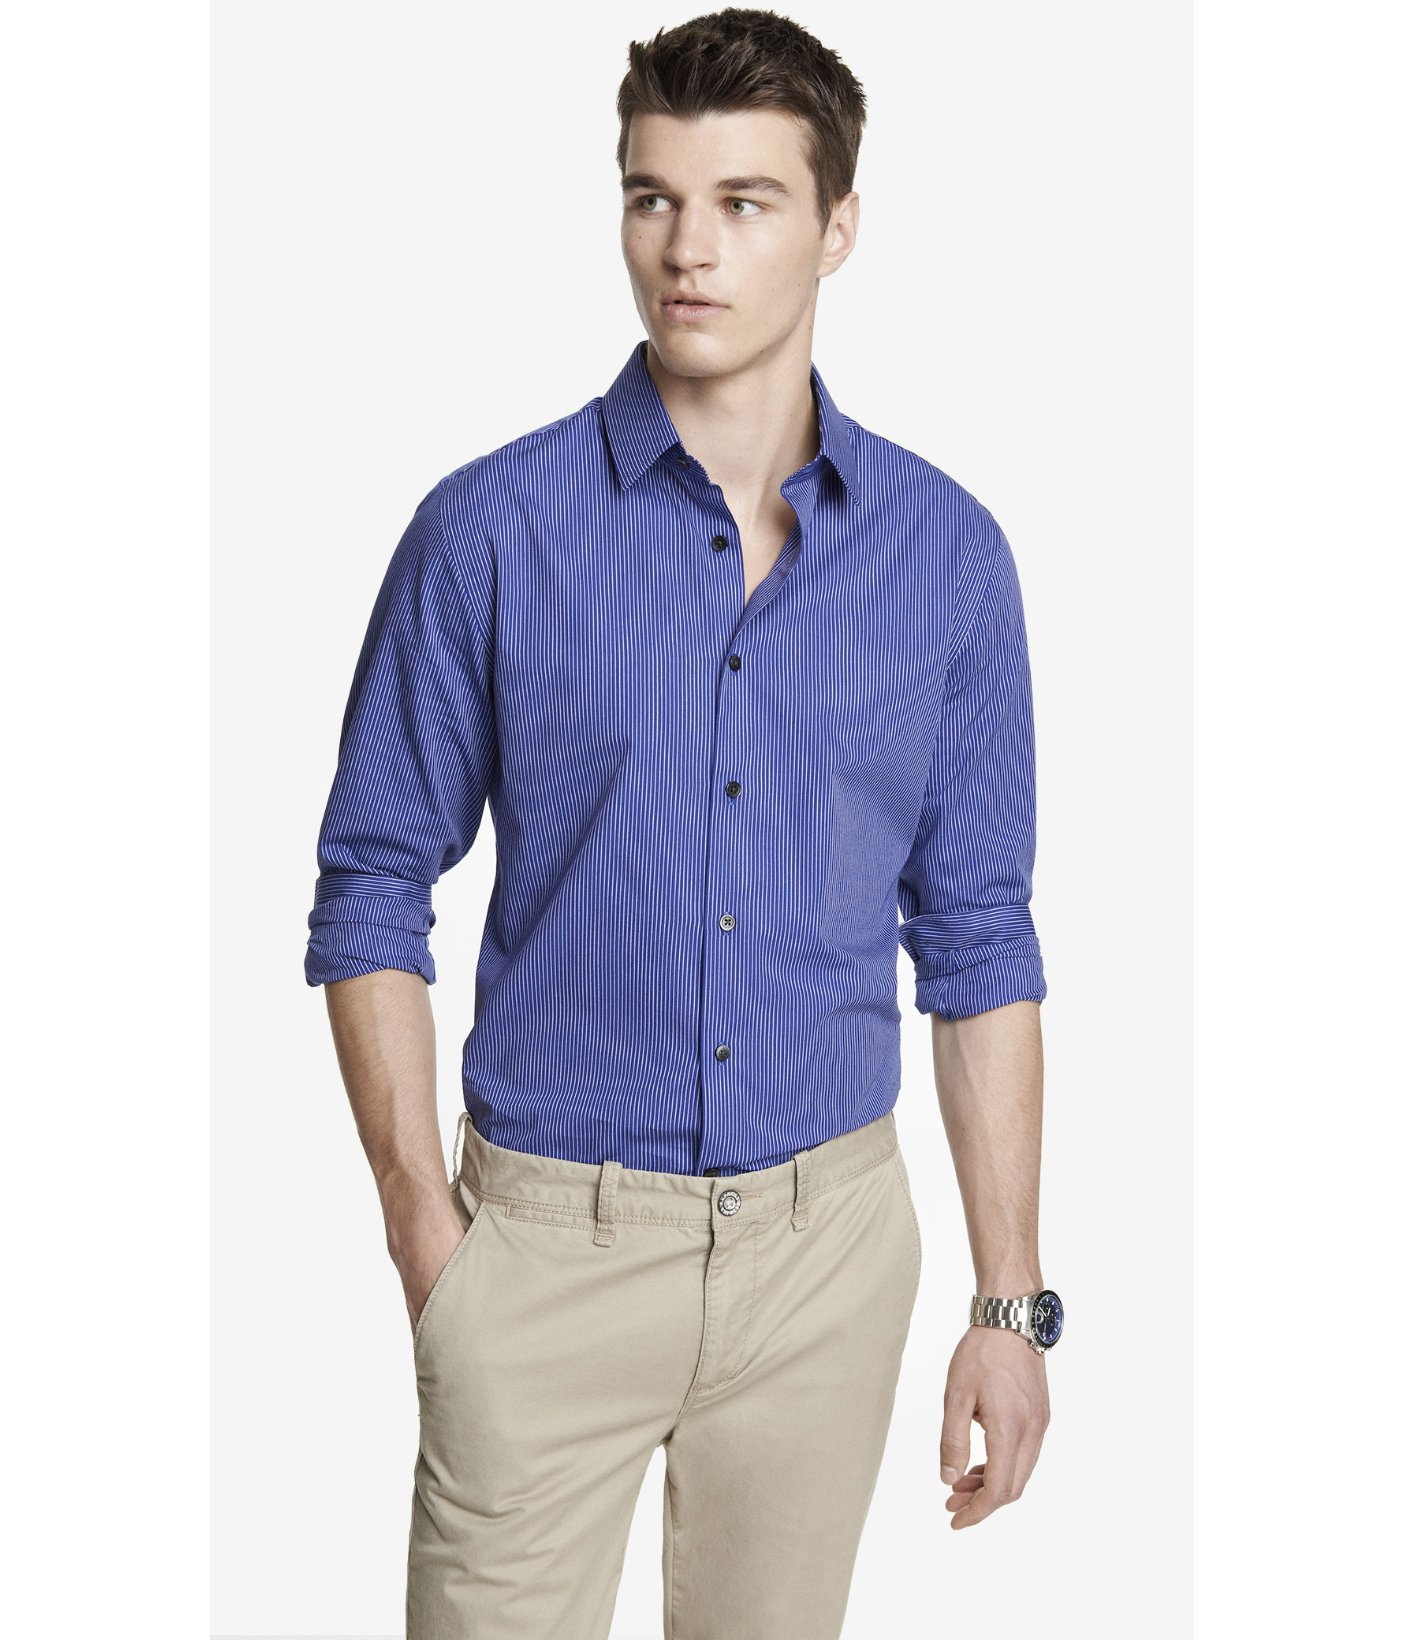 Lyst - Express Fitted Striped Dress Shirt in Blue for Men